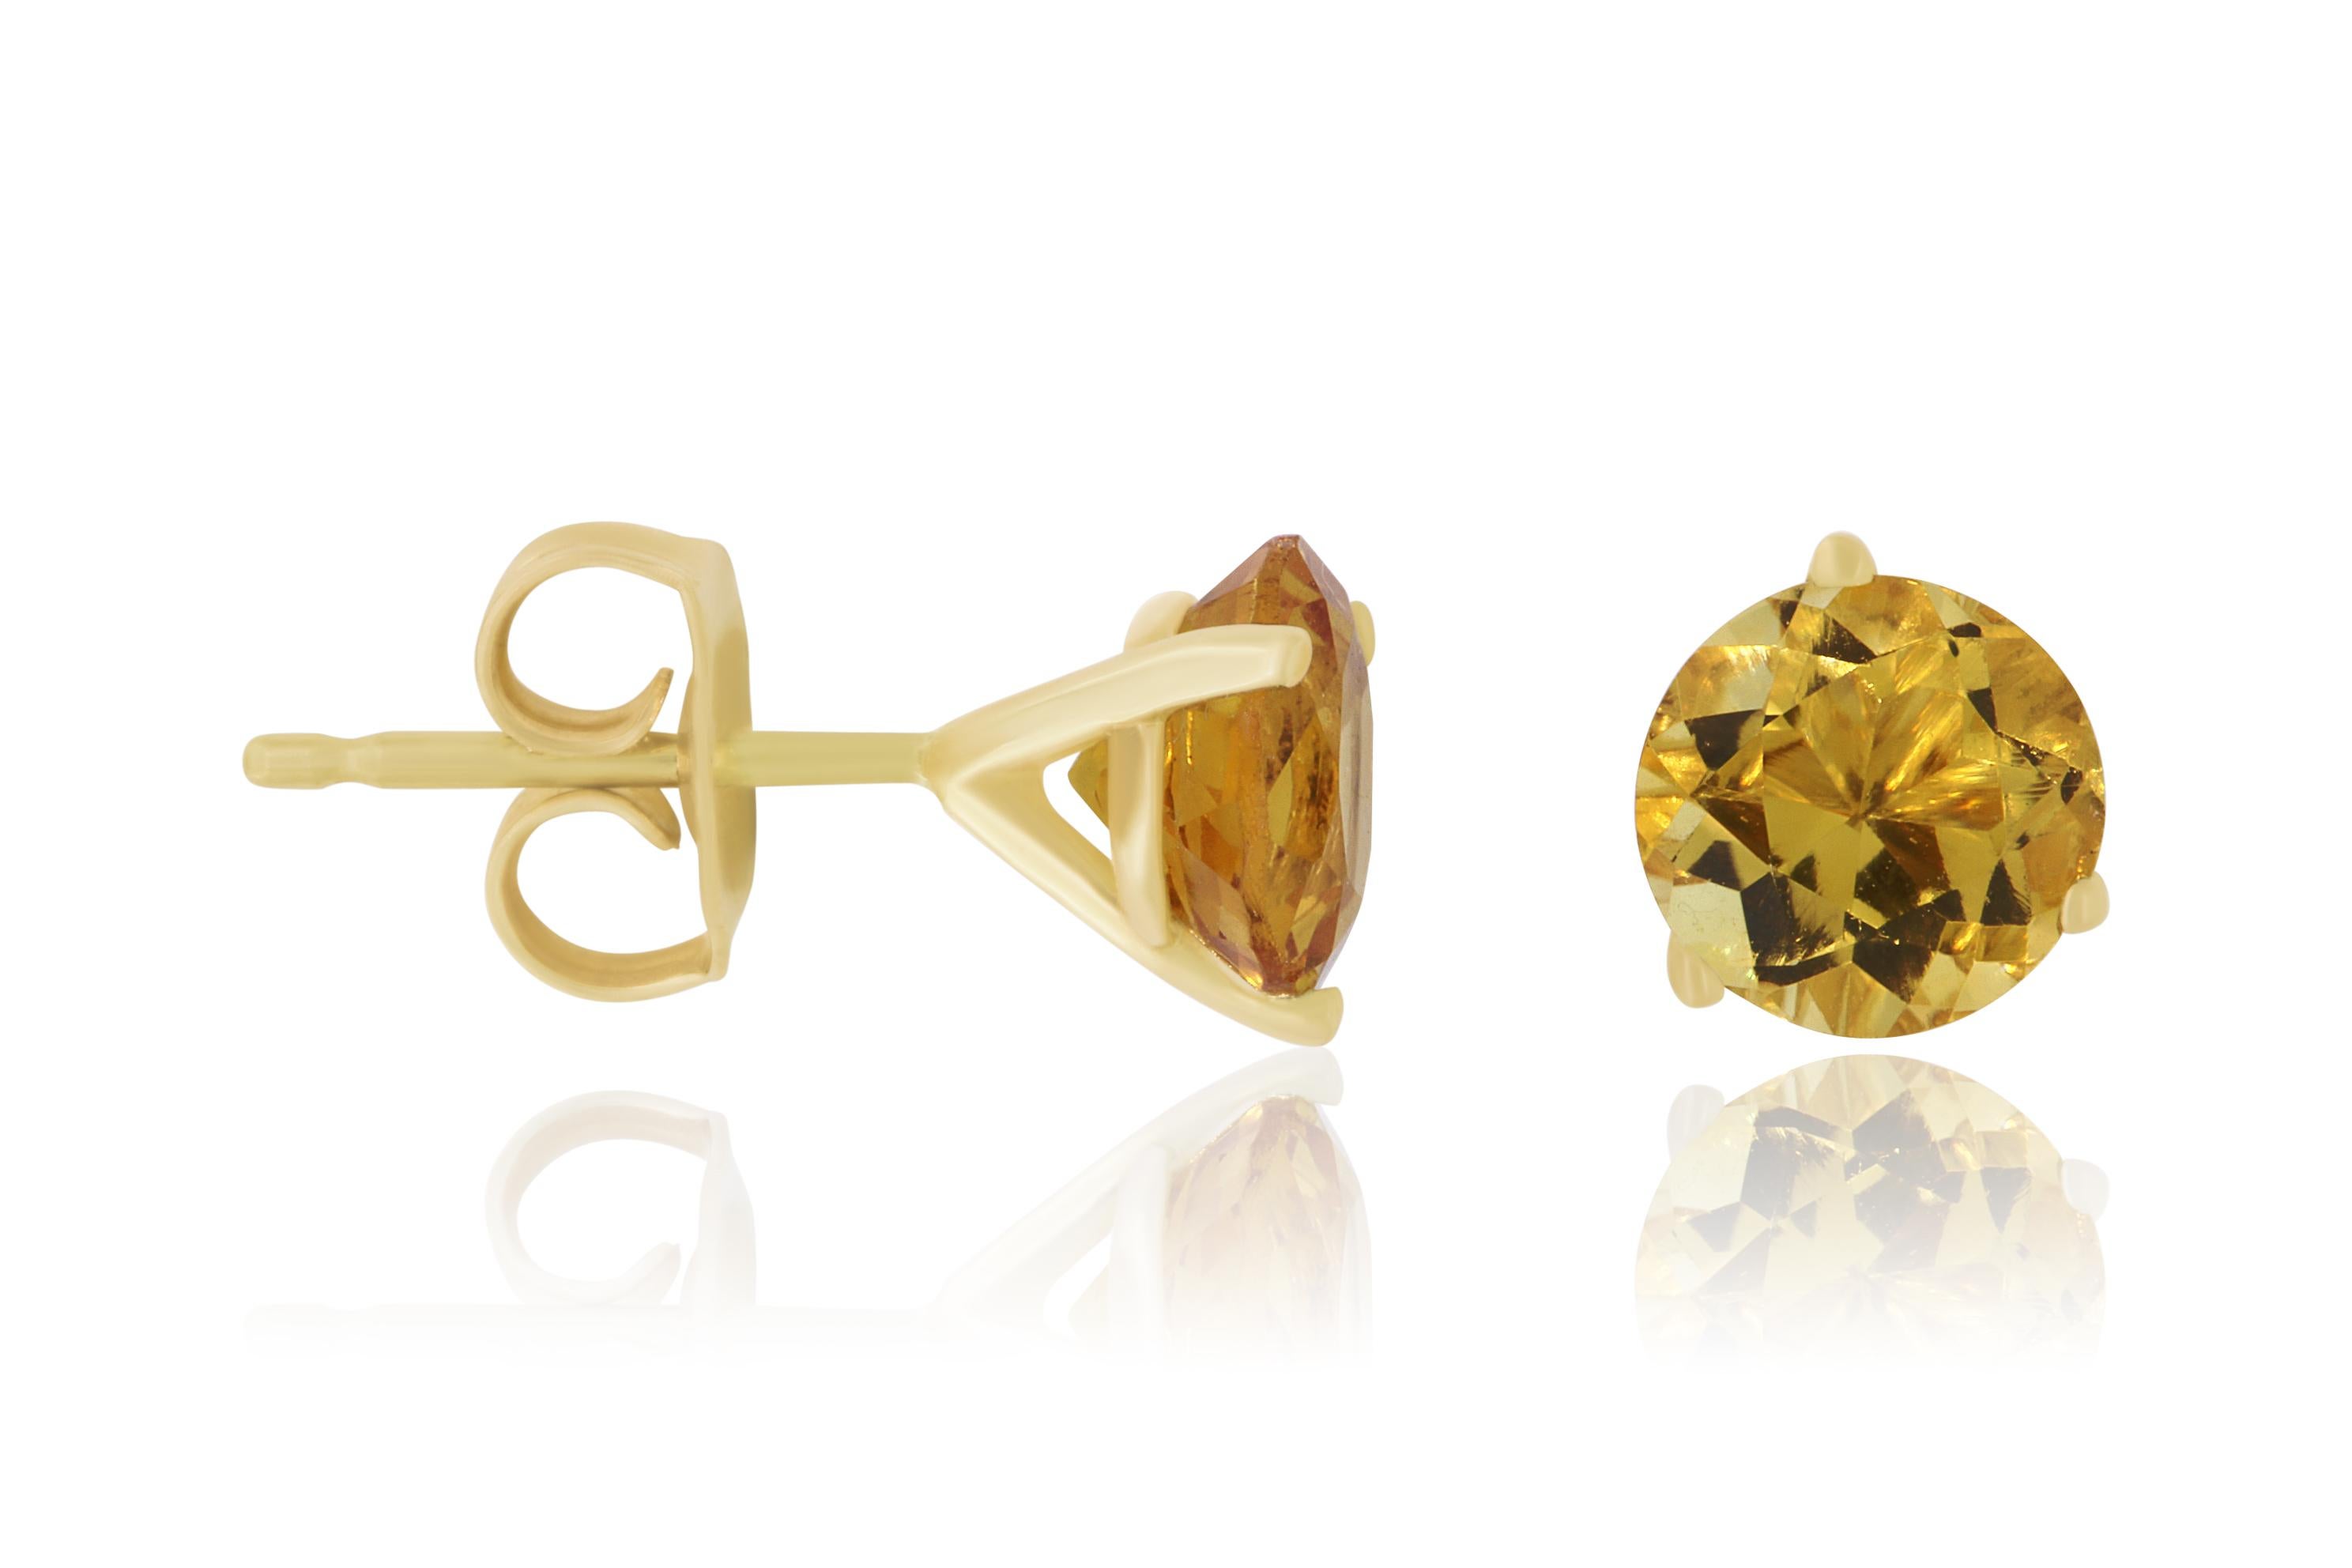 The most classic of all, you will shine with these Brilliant Round cut Citrine Earrings. At 1.55 Carats, we knew it was a match made in heaven when we found these prestige quality stones, matching so perfectly in quality and size. A staple piece for